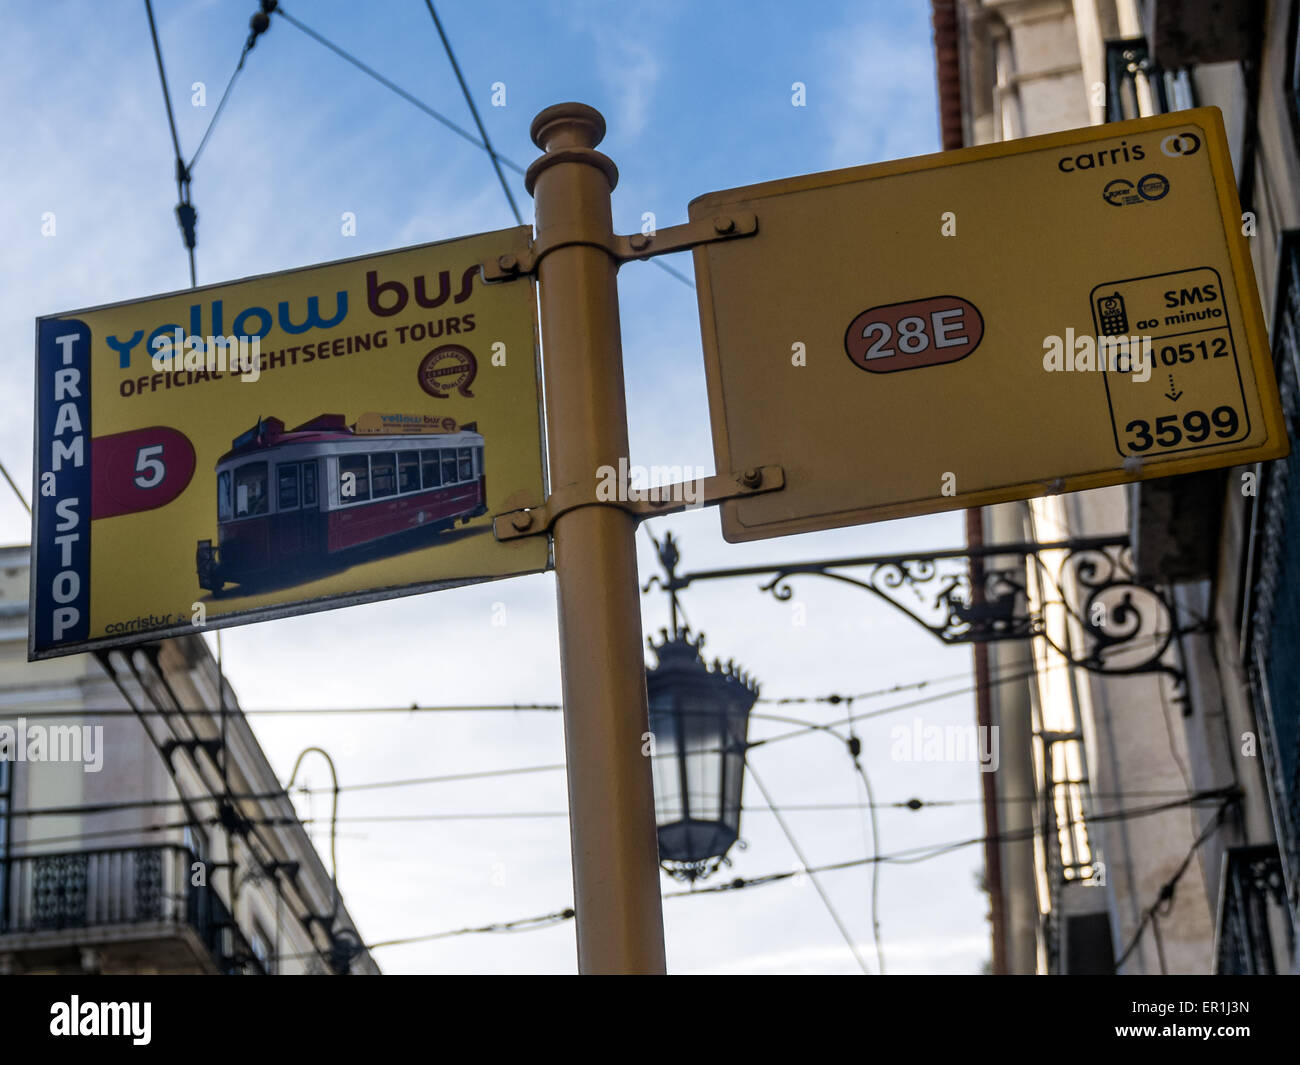 Bus Stop sign for Yellow Bus Tours and 28E Tram Stock Photo